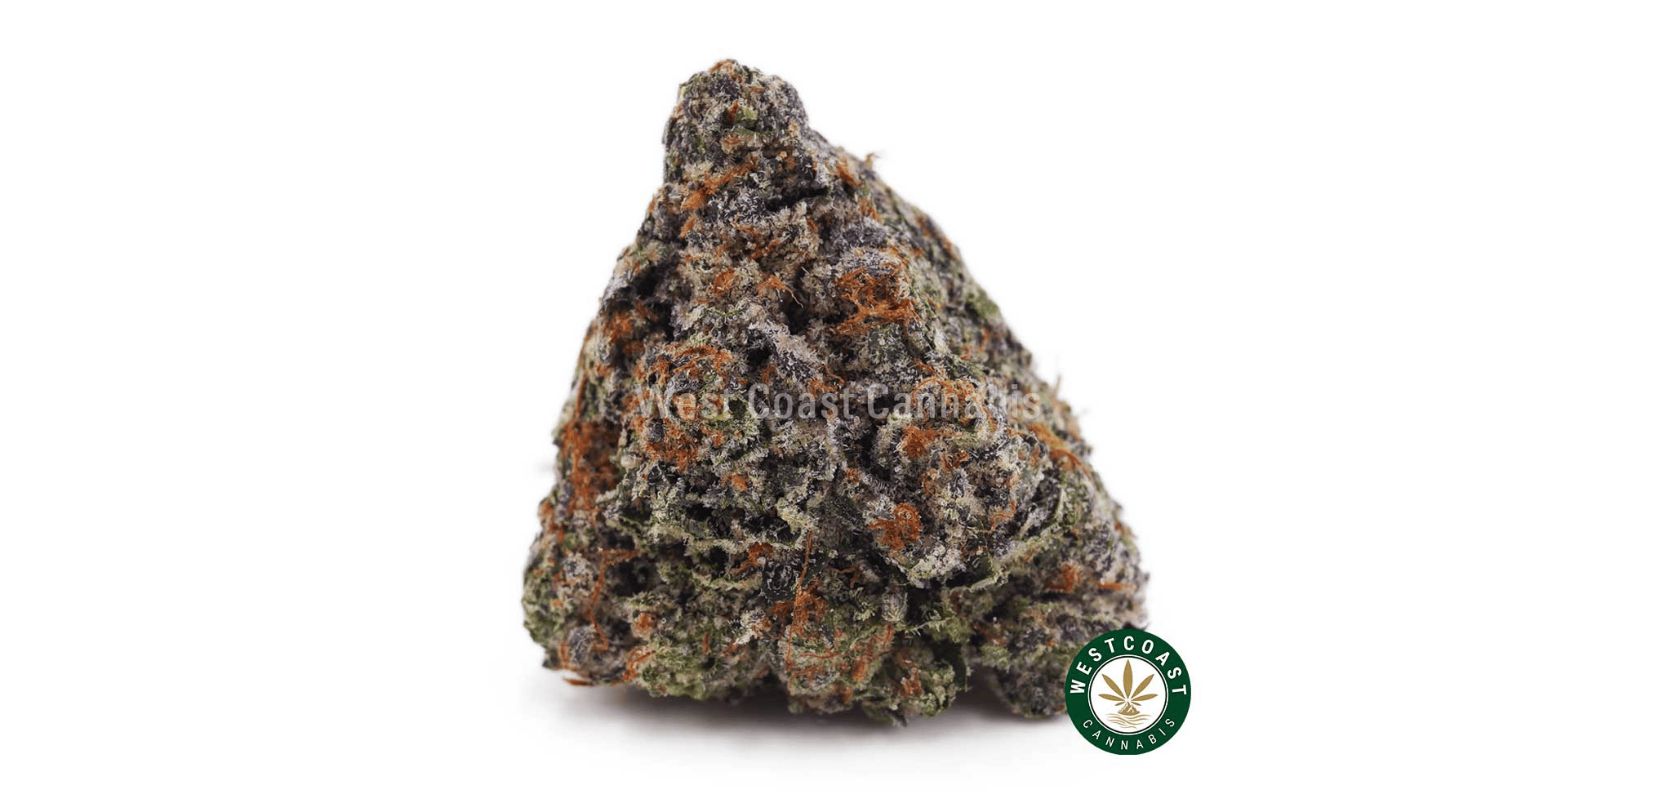 The Gassy Gelato AAAA+ is another top shelf BC bud with enticing flavour and even more mind-blowing effects. 